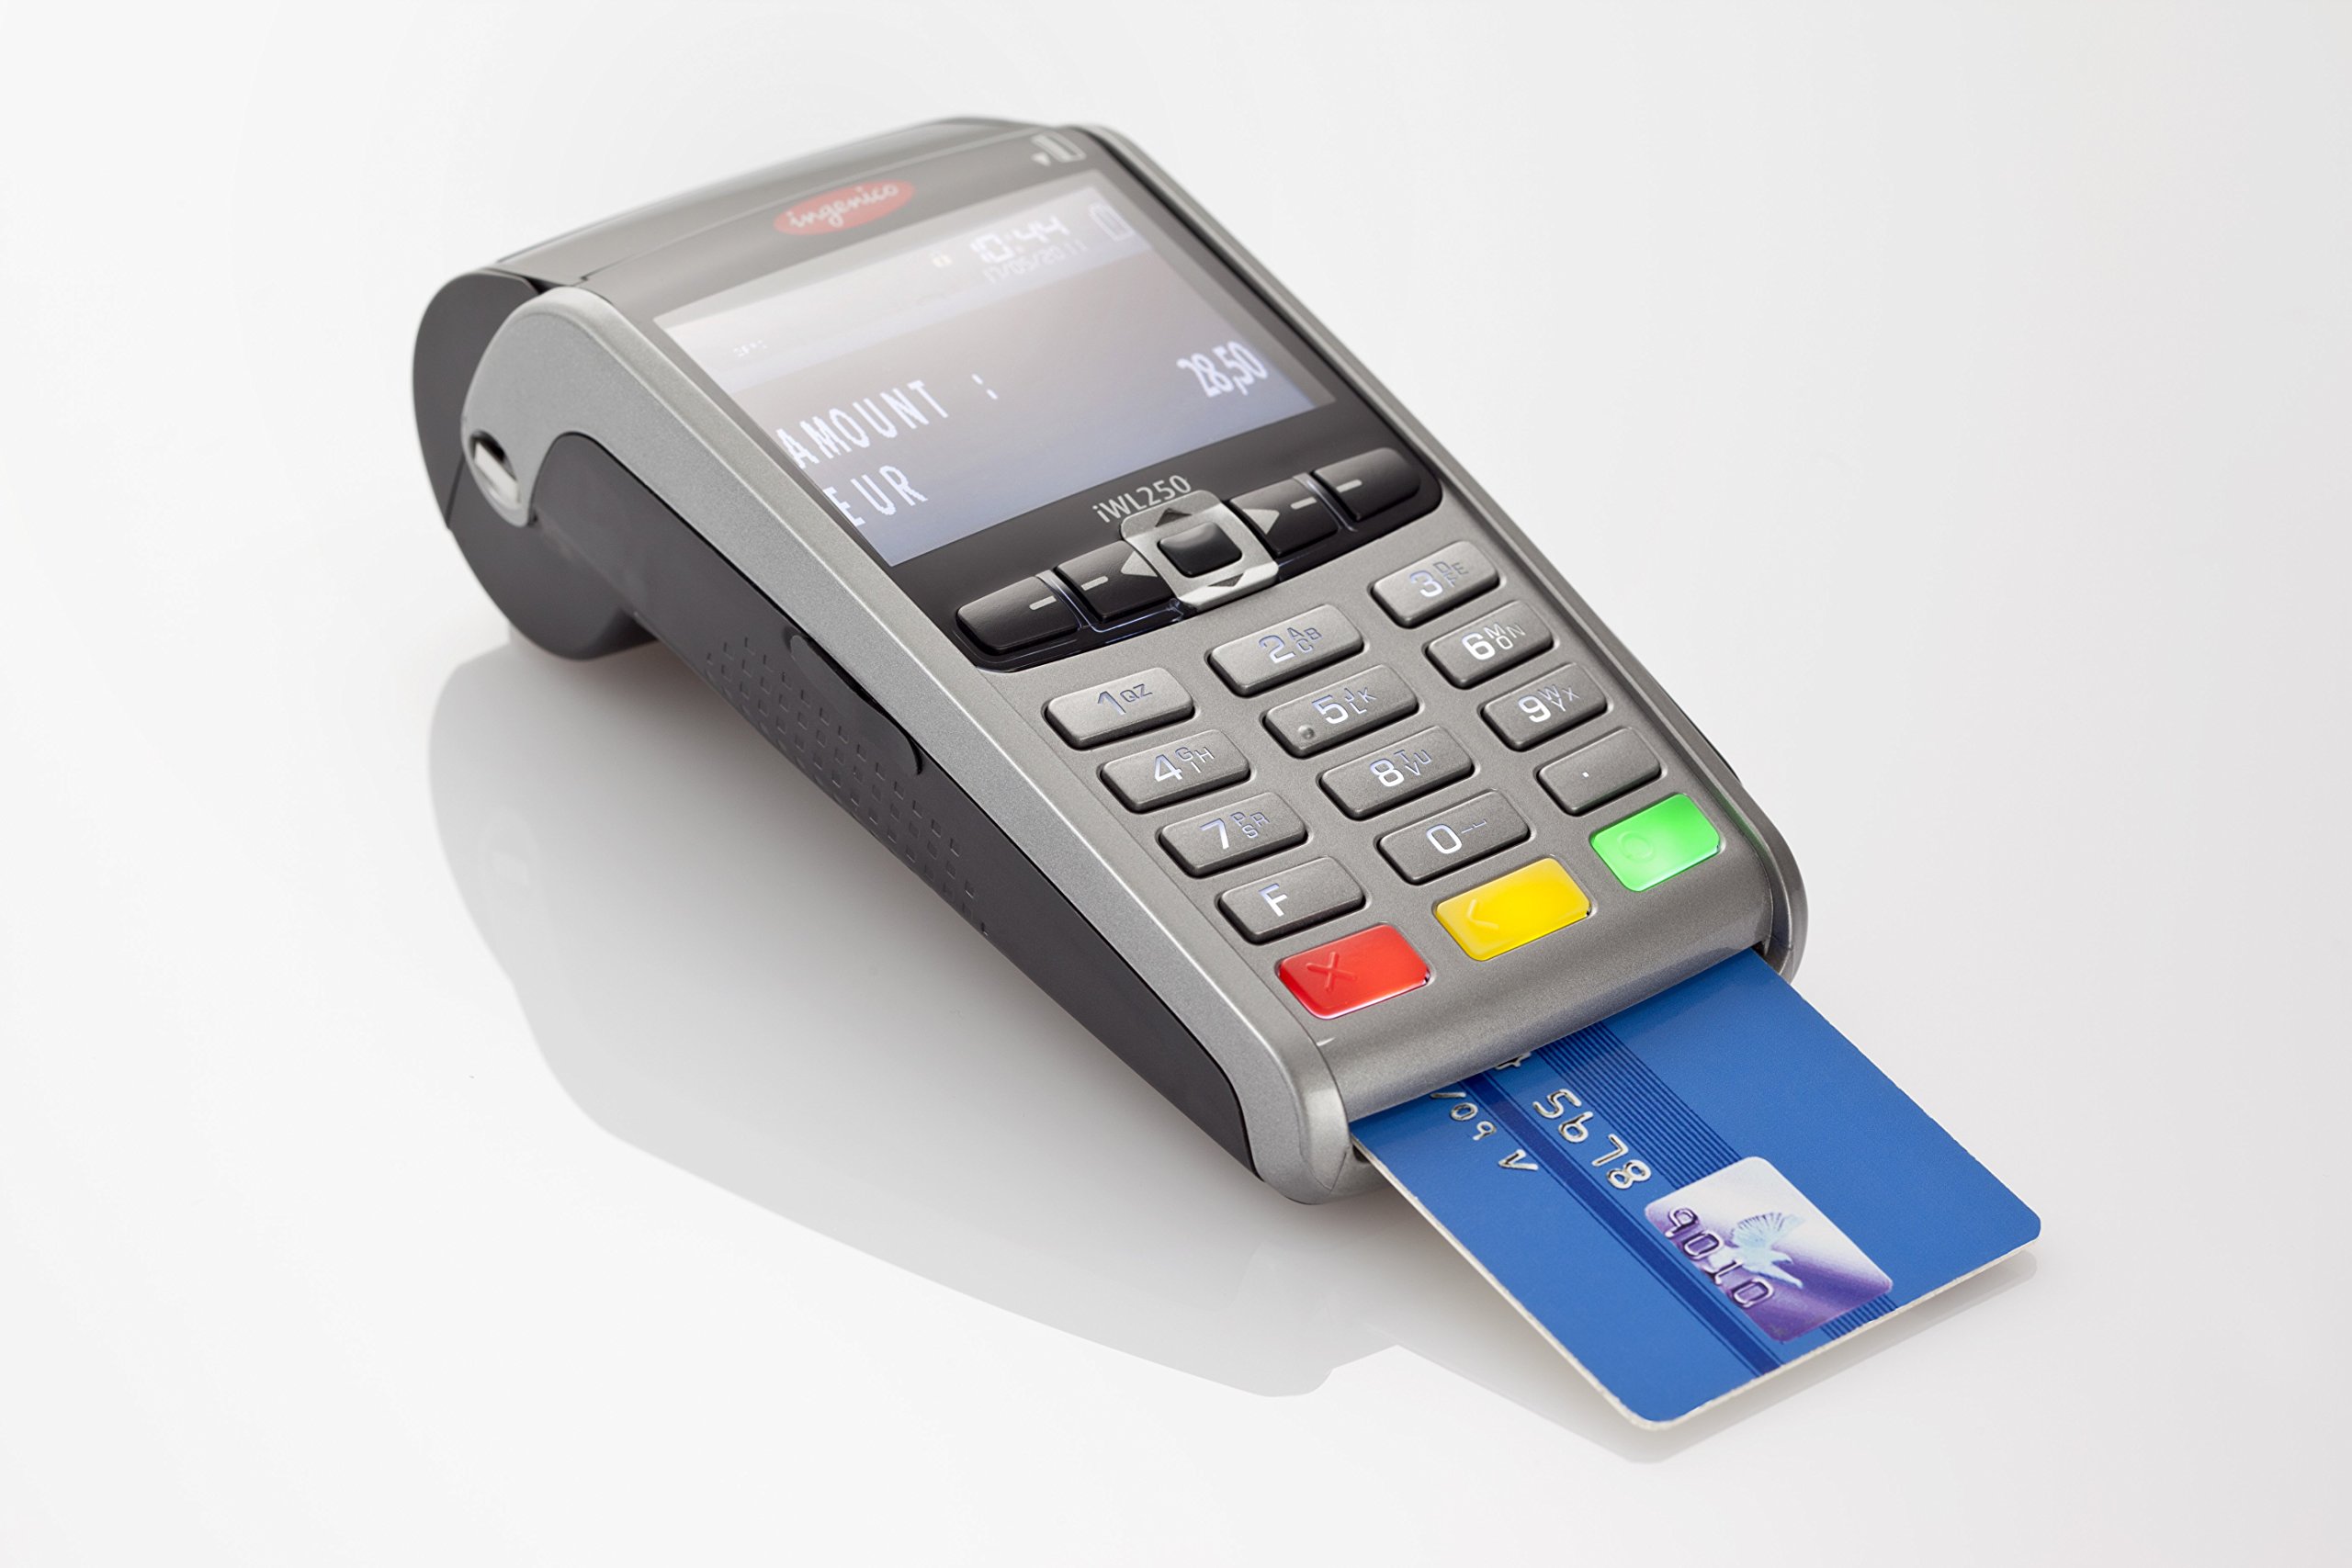 What Does Sec Violation Mean On A Credit Card Machine